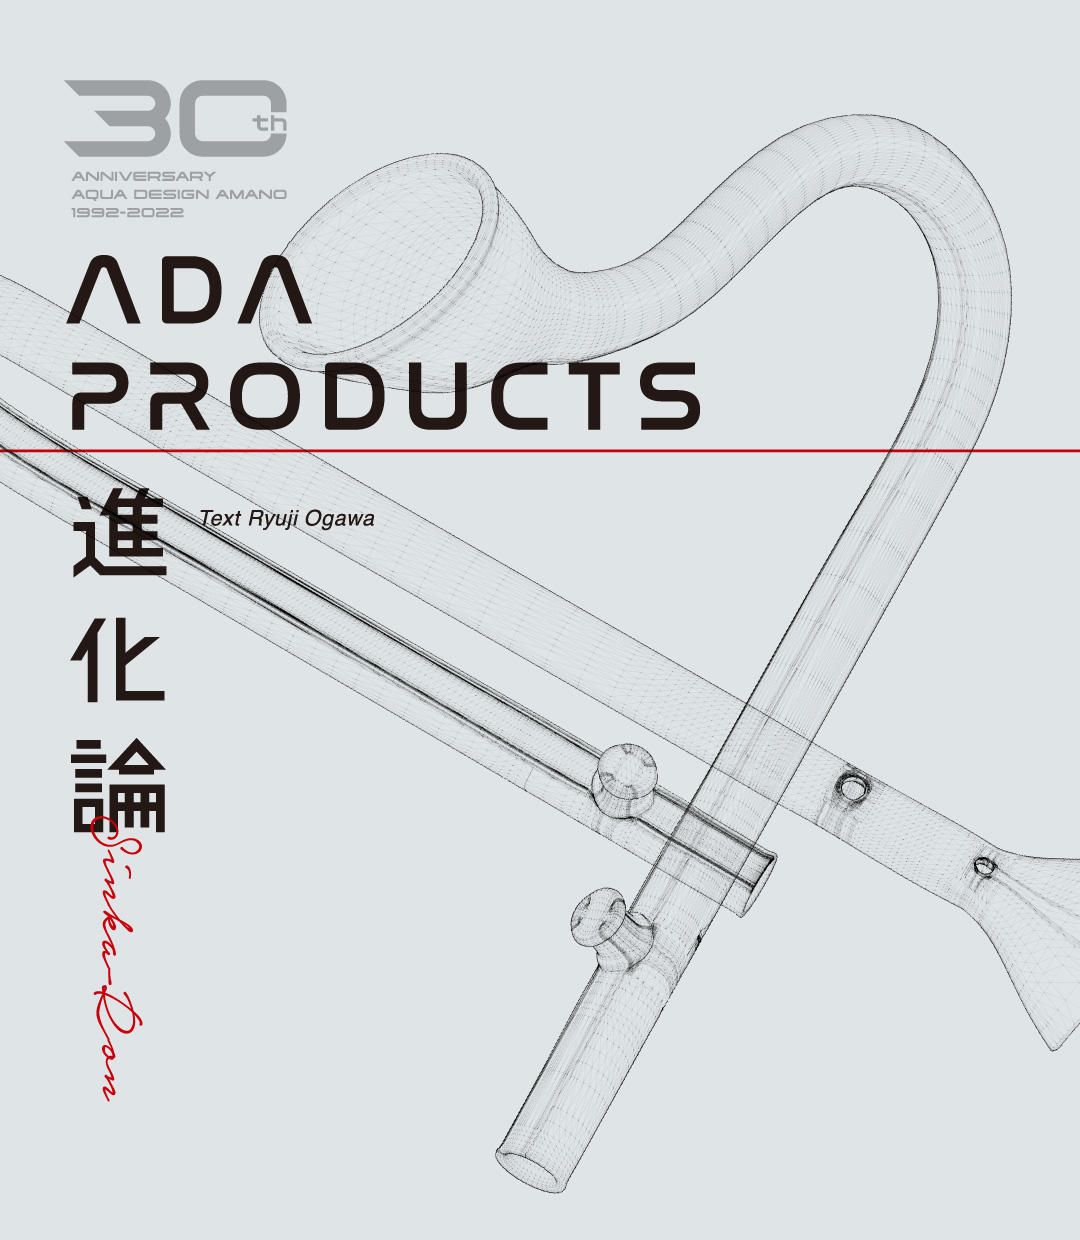 ADA PRODUCTS -The theory of evolution- #6. LILY PIPE SERIES